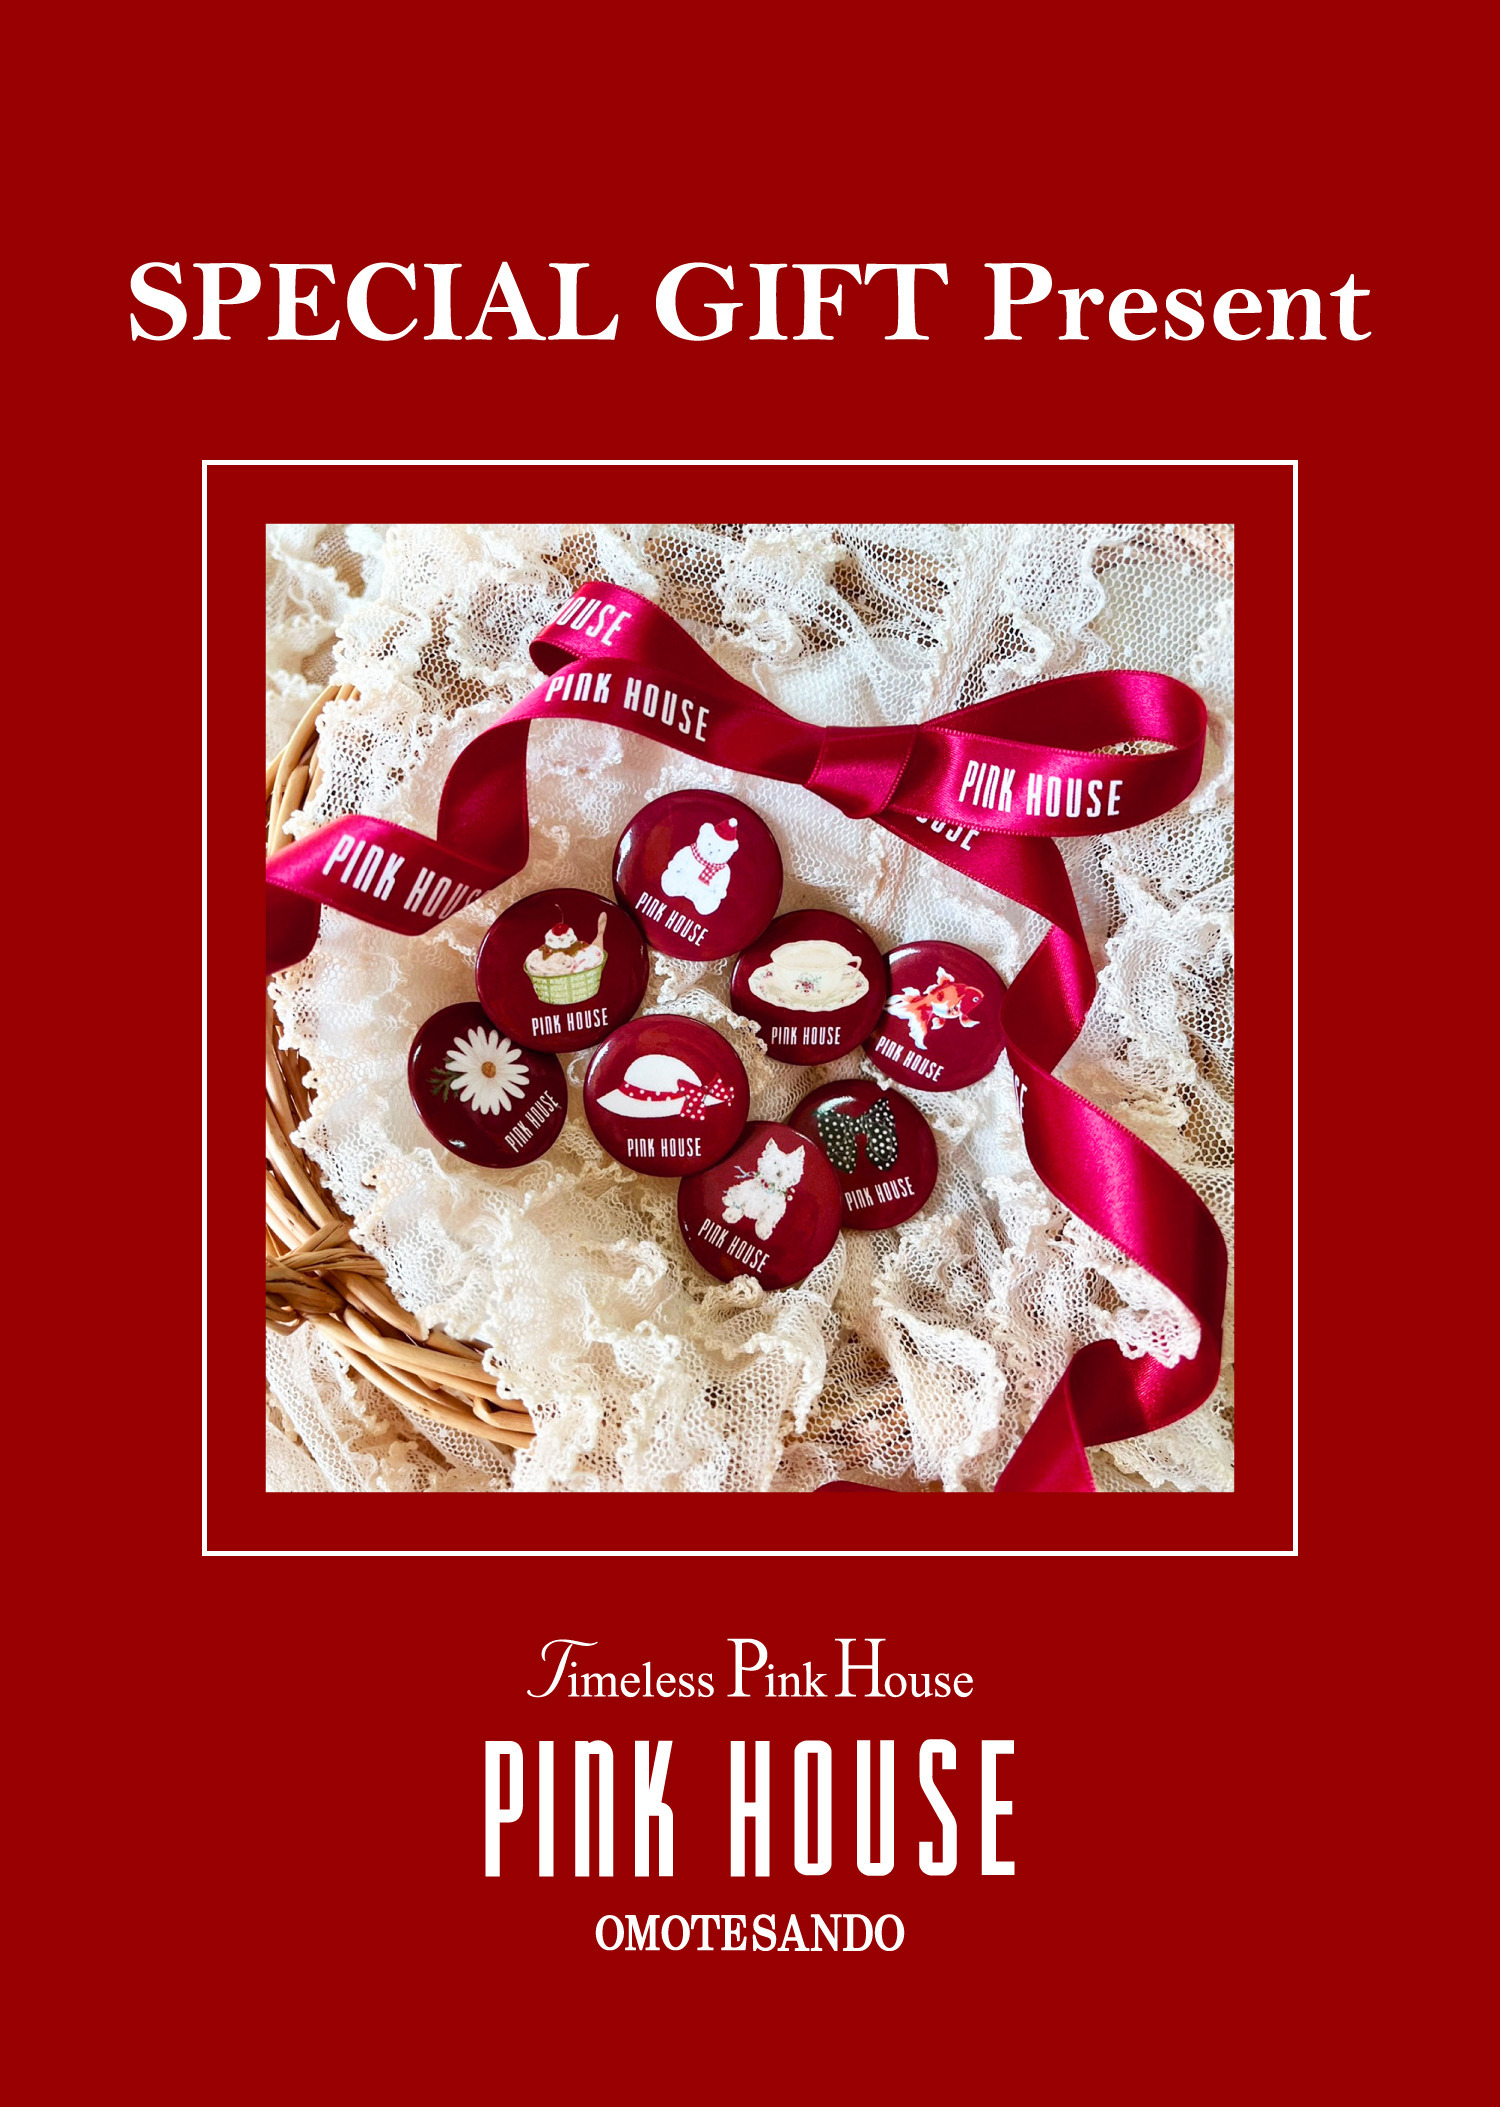 Timeless Pink House 表参道店 SPECIAL GIFT Present!